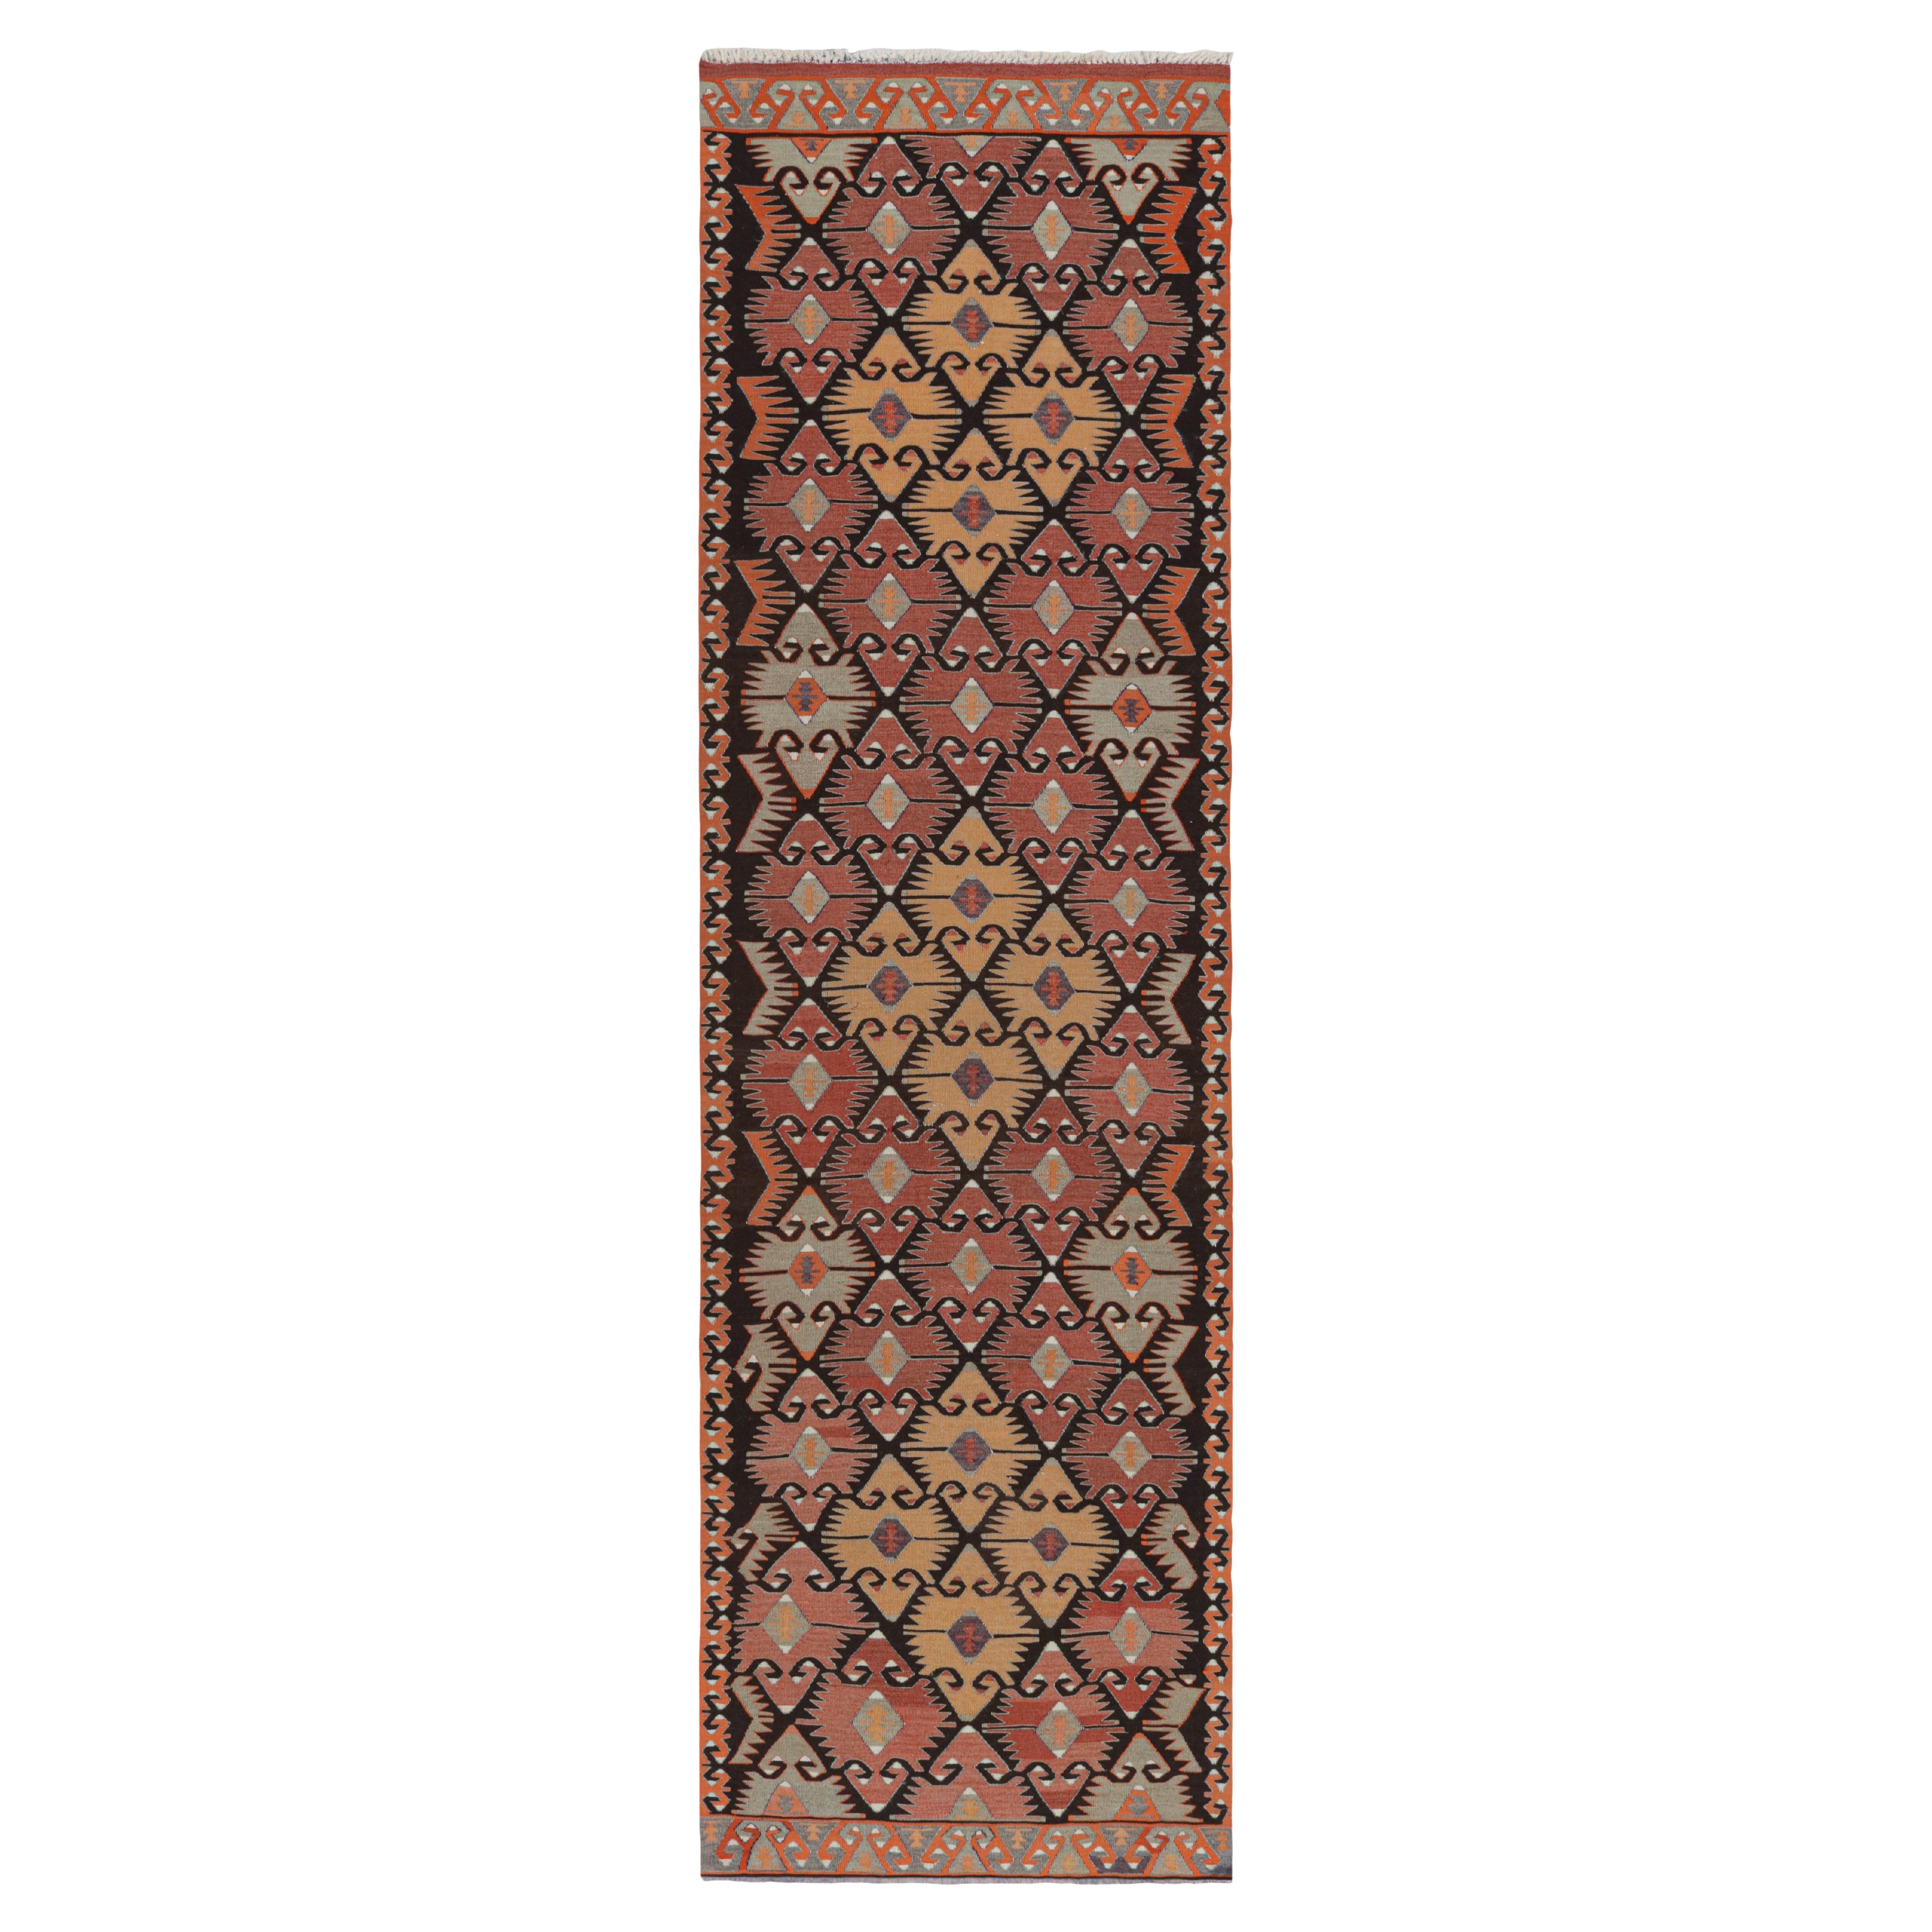 Vintage Burgundy Brown Wool Kilim Rug with Blue and Yellow Accent by Rug & Kilim